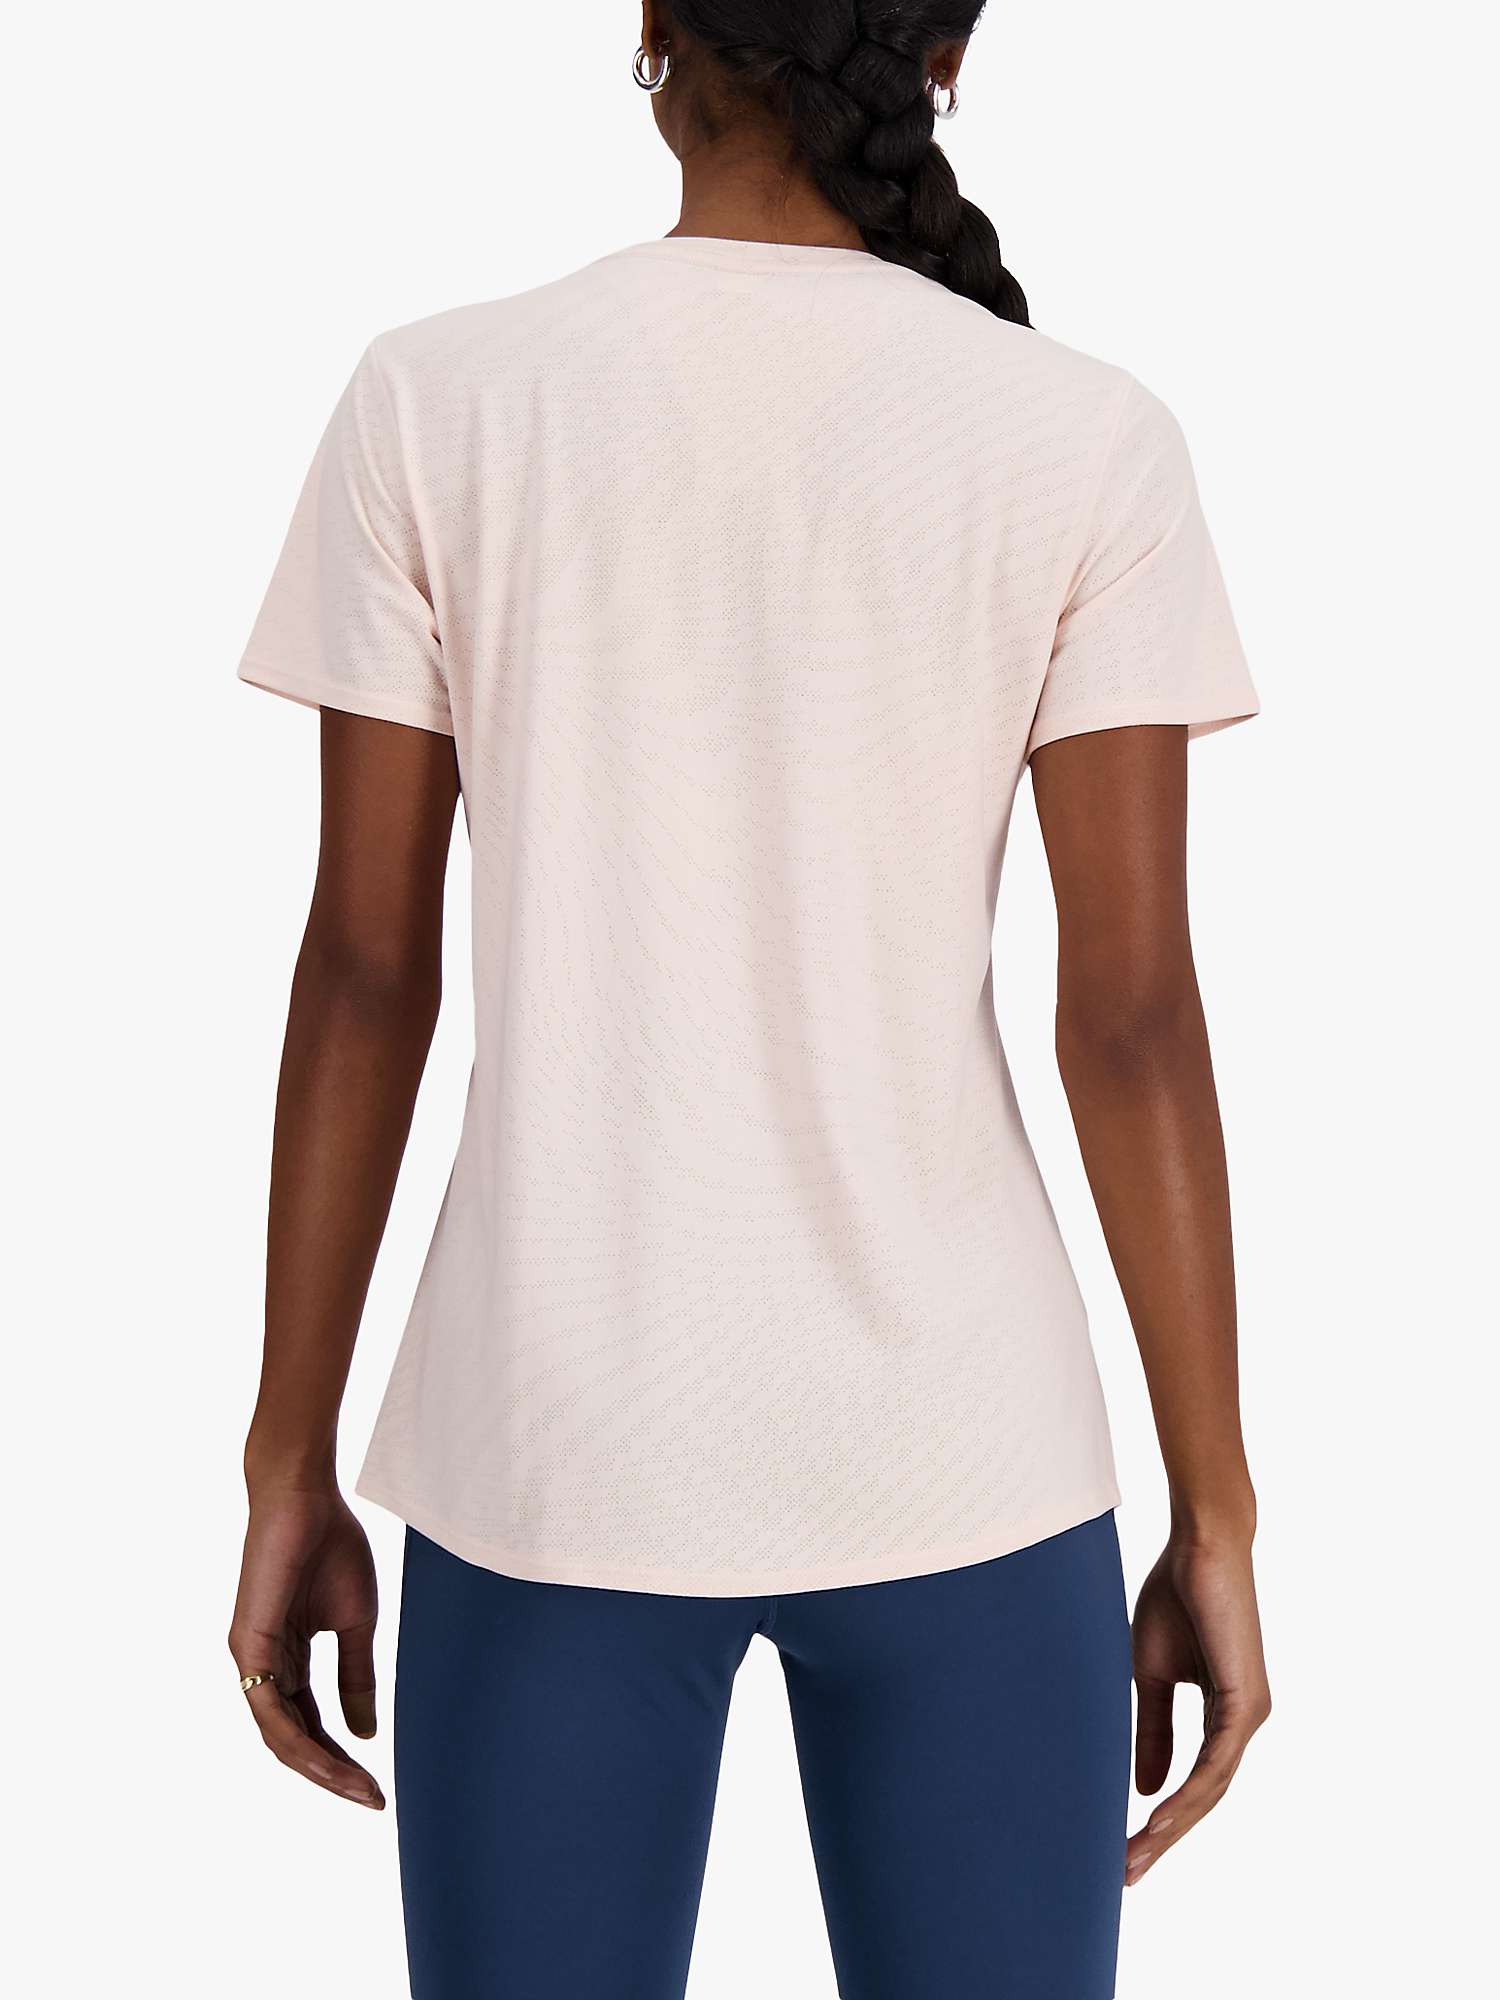 Buy New Balance Breathable Women's Short Sleeve Top, Light Pink Online at johnlewis.com